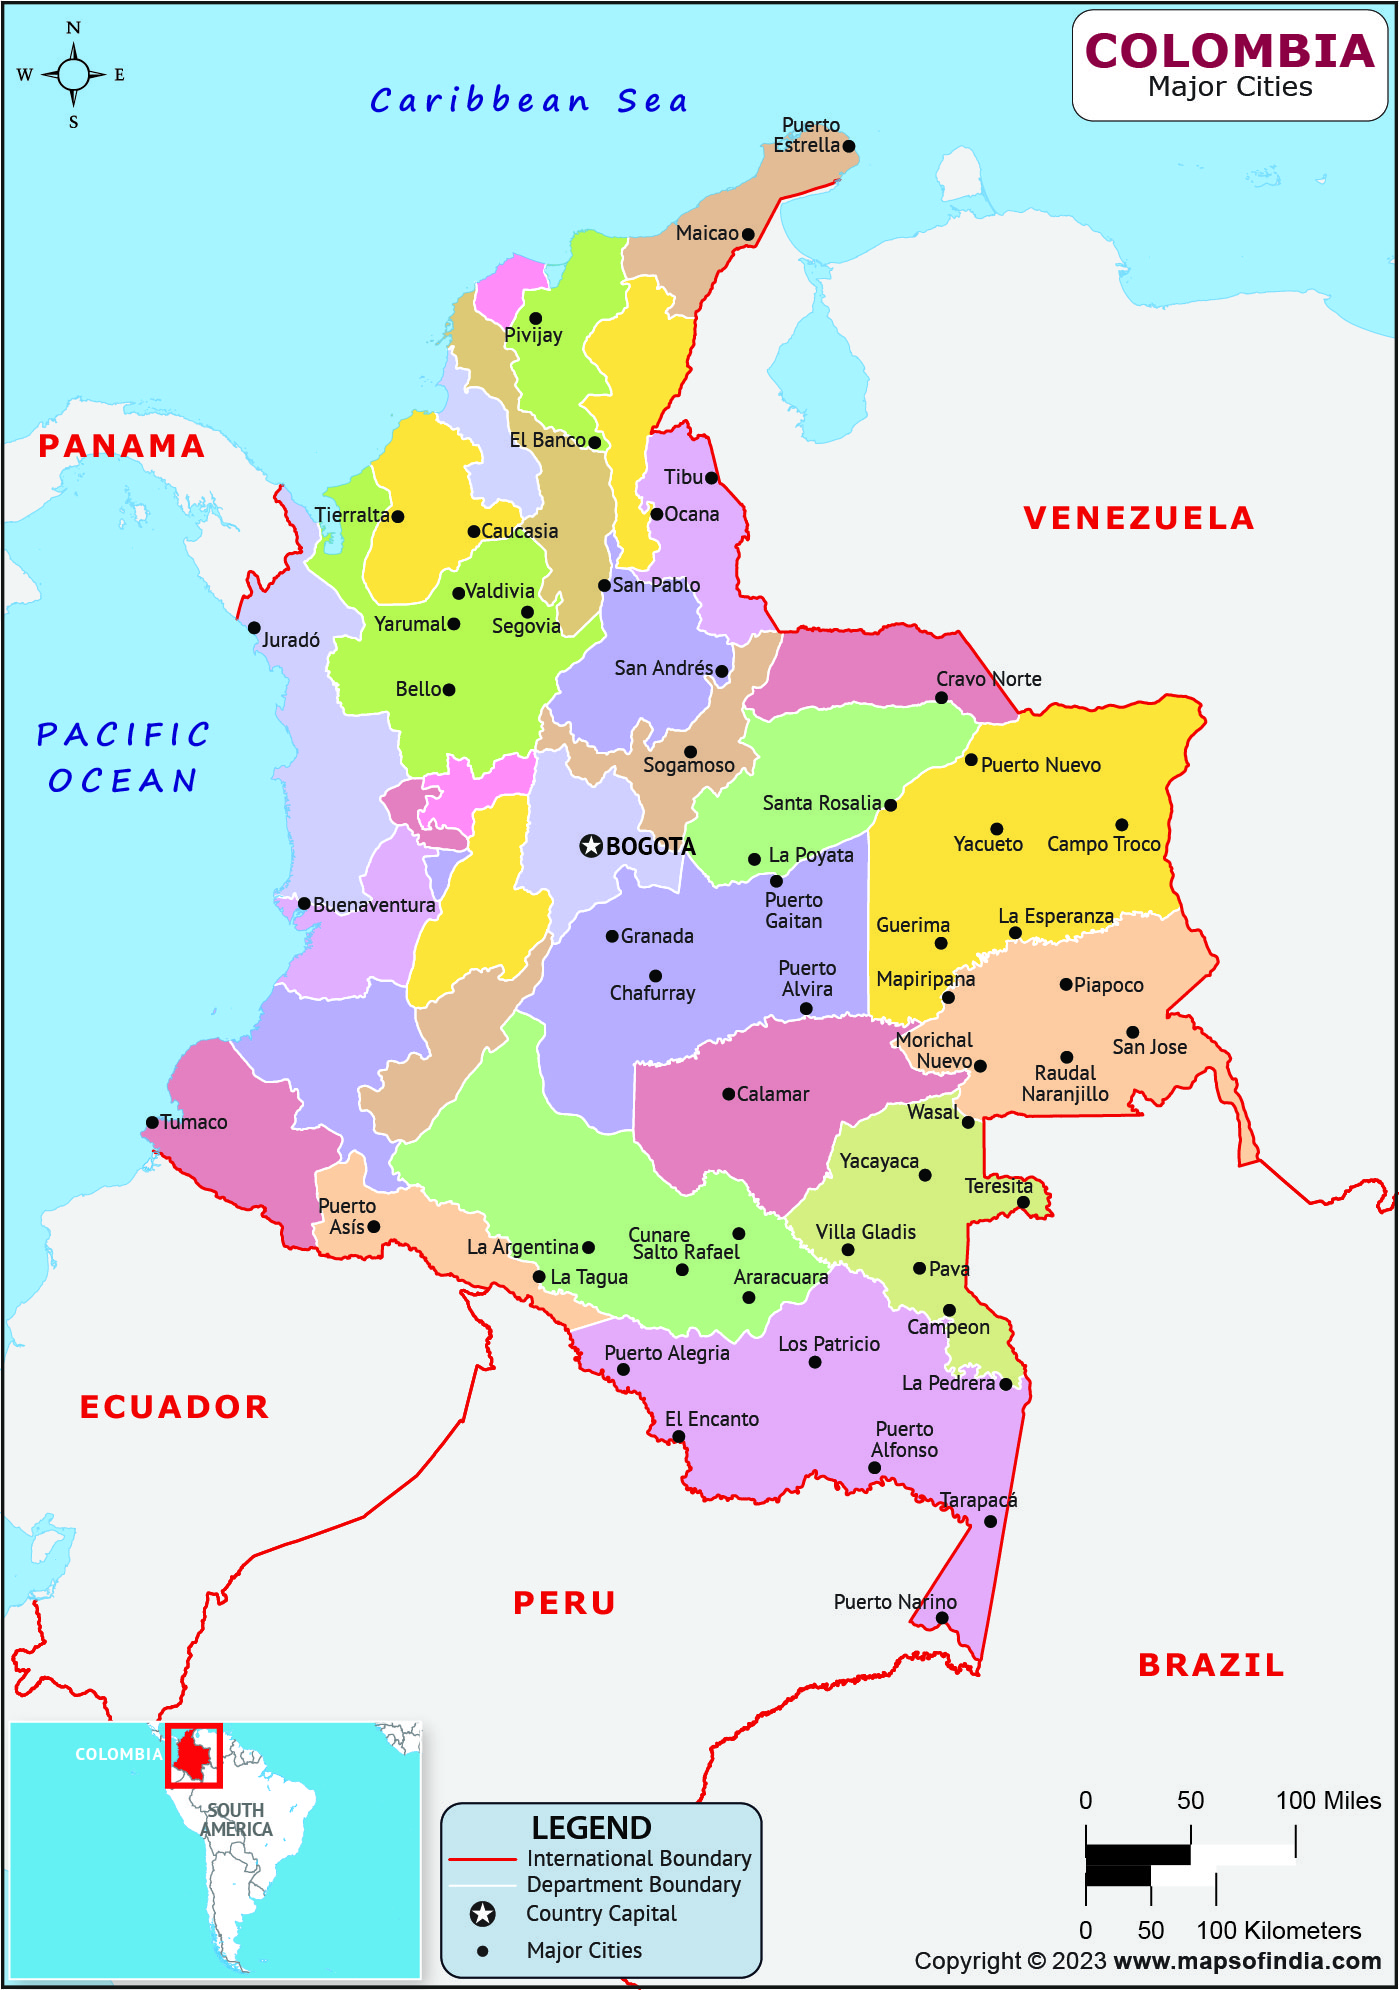 Colombia Major Cities Map | List of Major Cities in Different States of ...